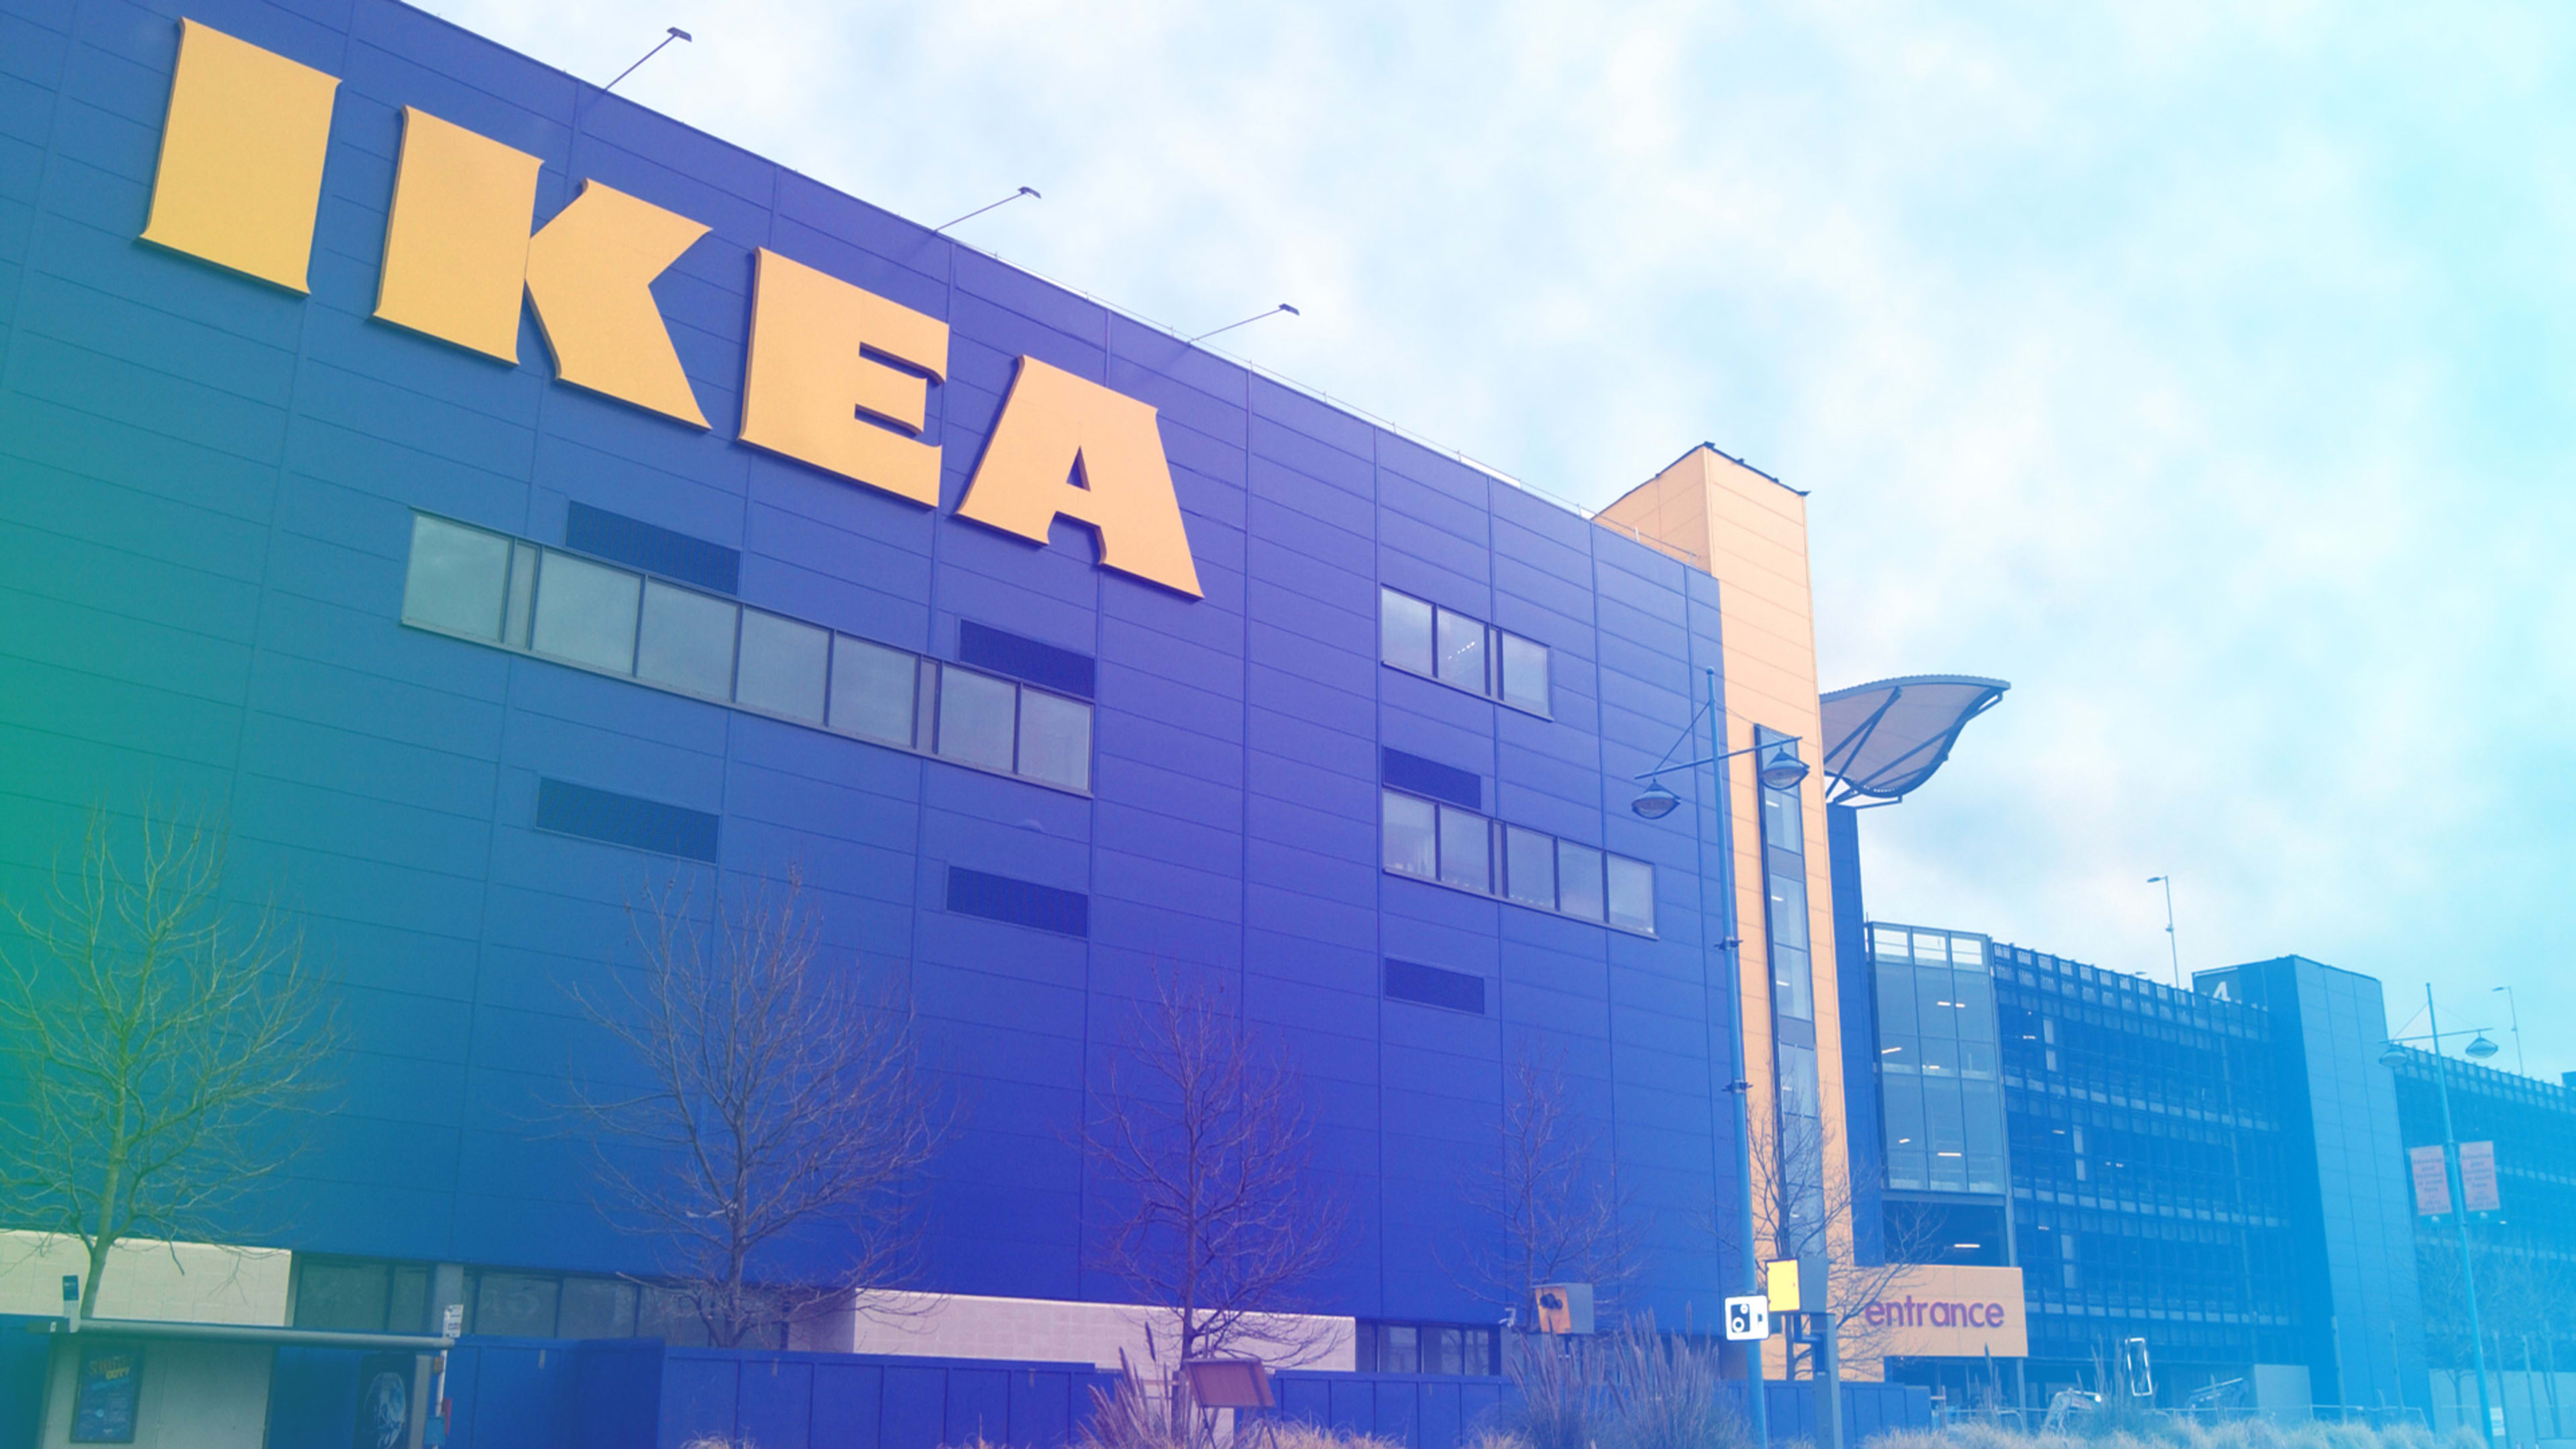 Ikea has opened its first store in India